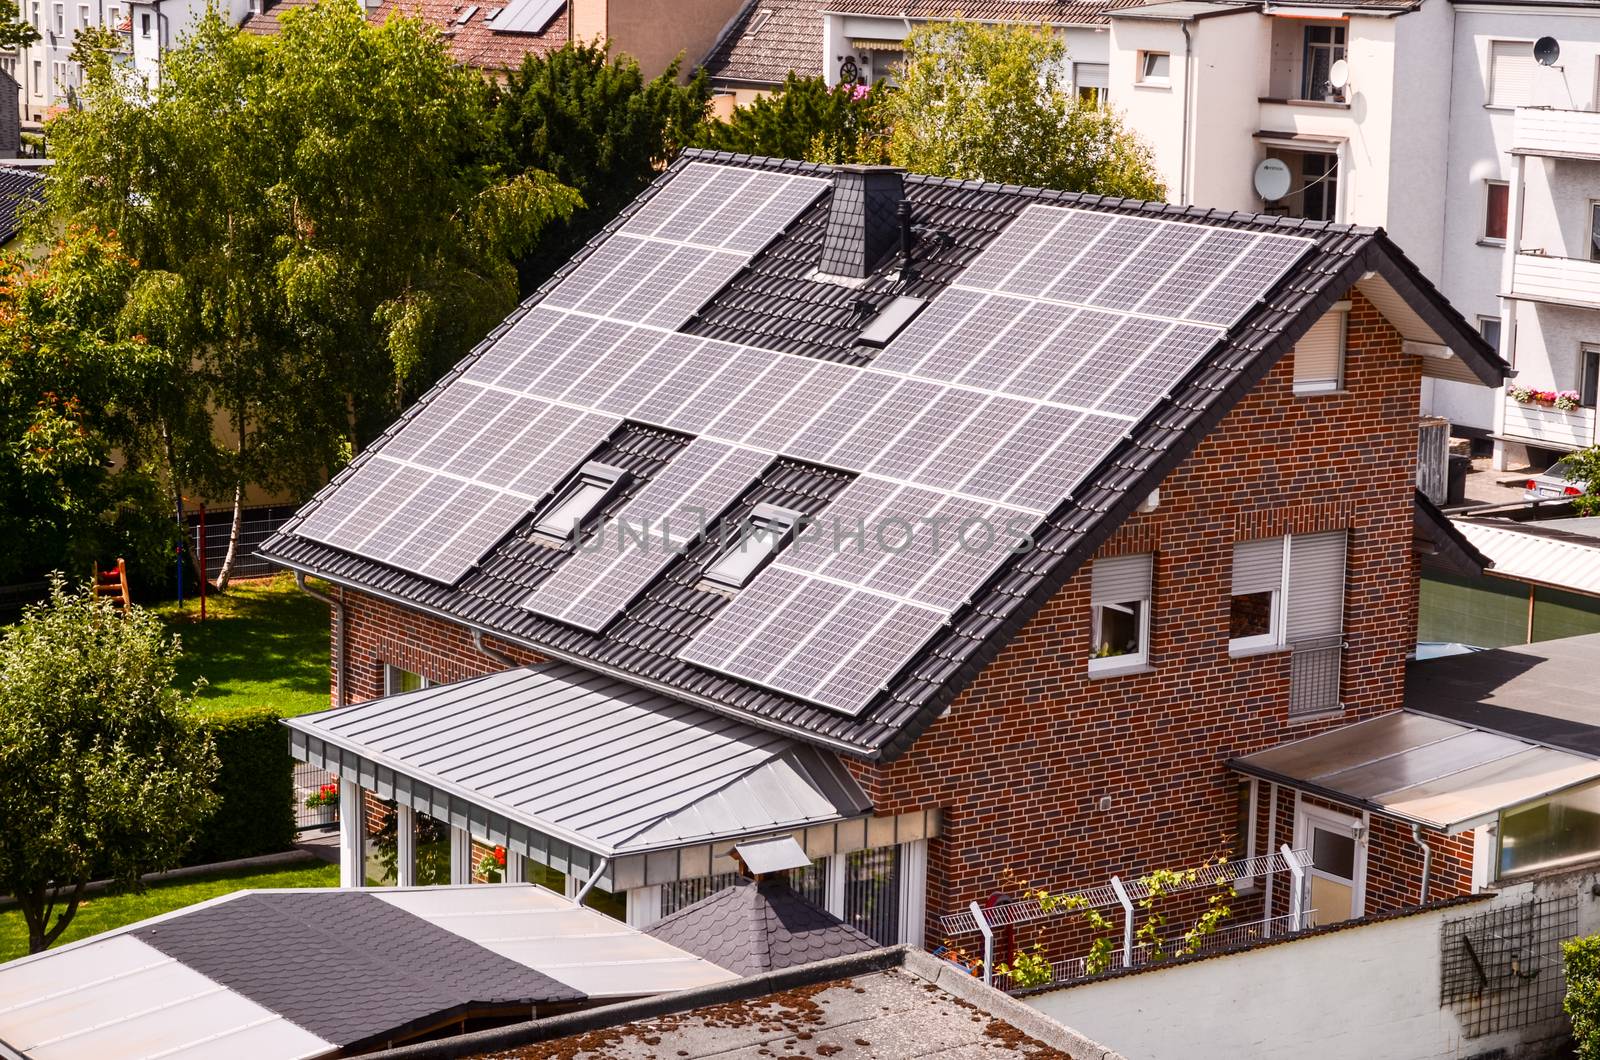 Green Renewable Energy with Photovoltaic Panels on the Roof.